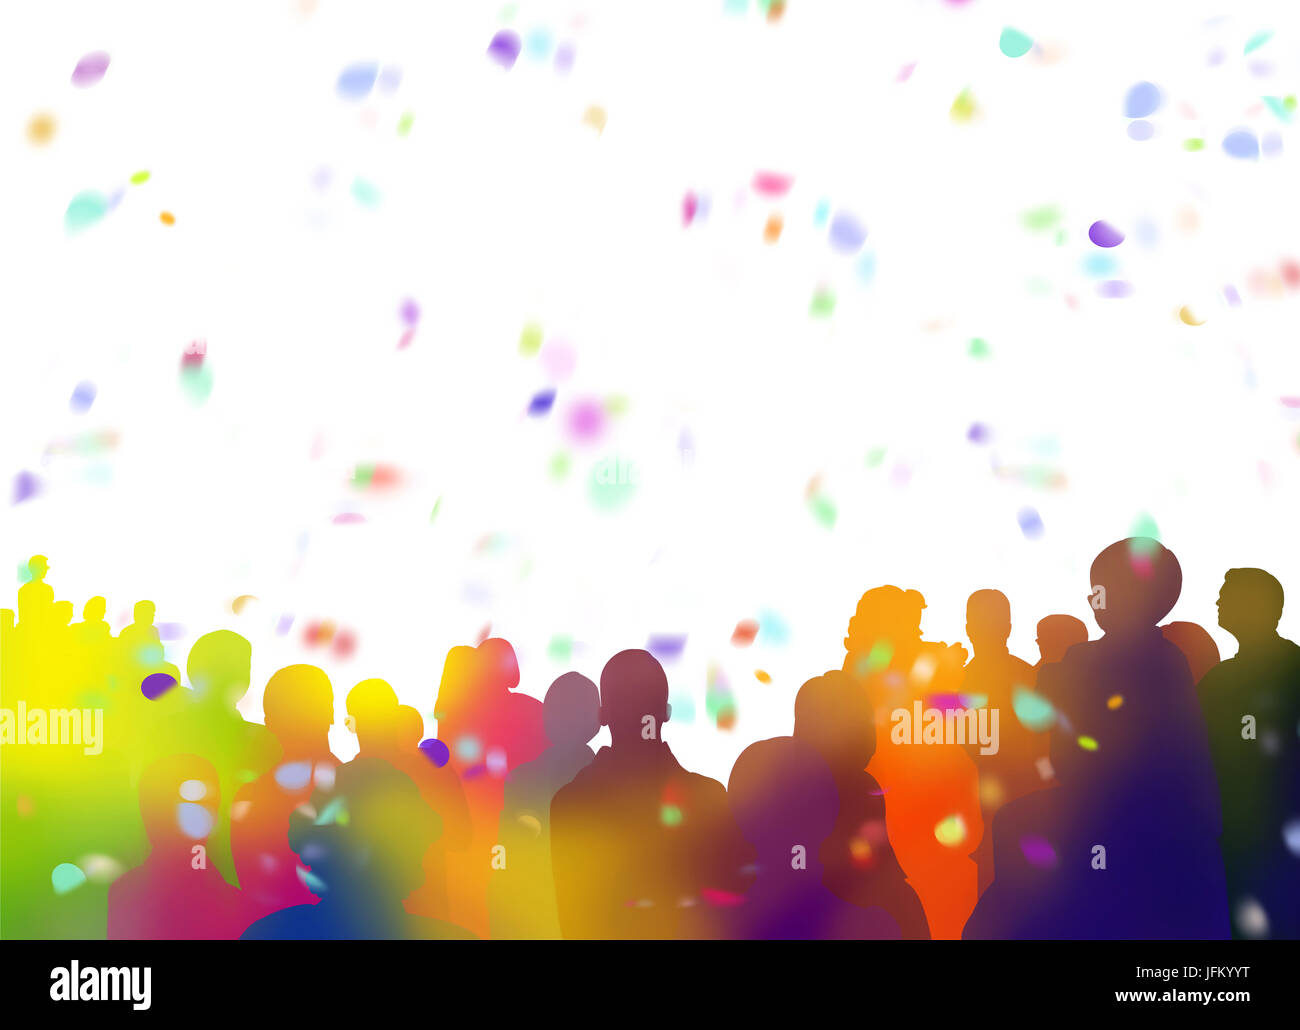 spectator silhouettes and confetti on white background Stock Photo